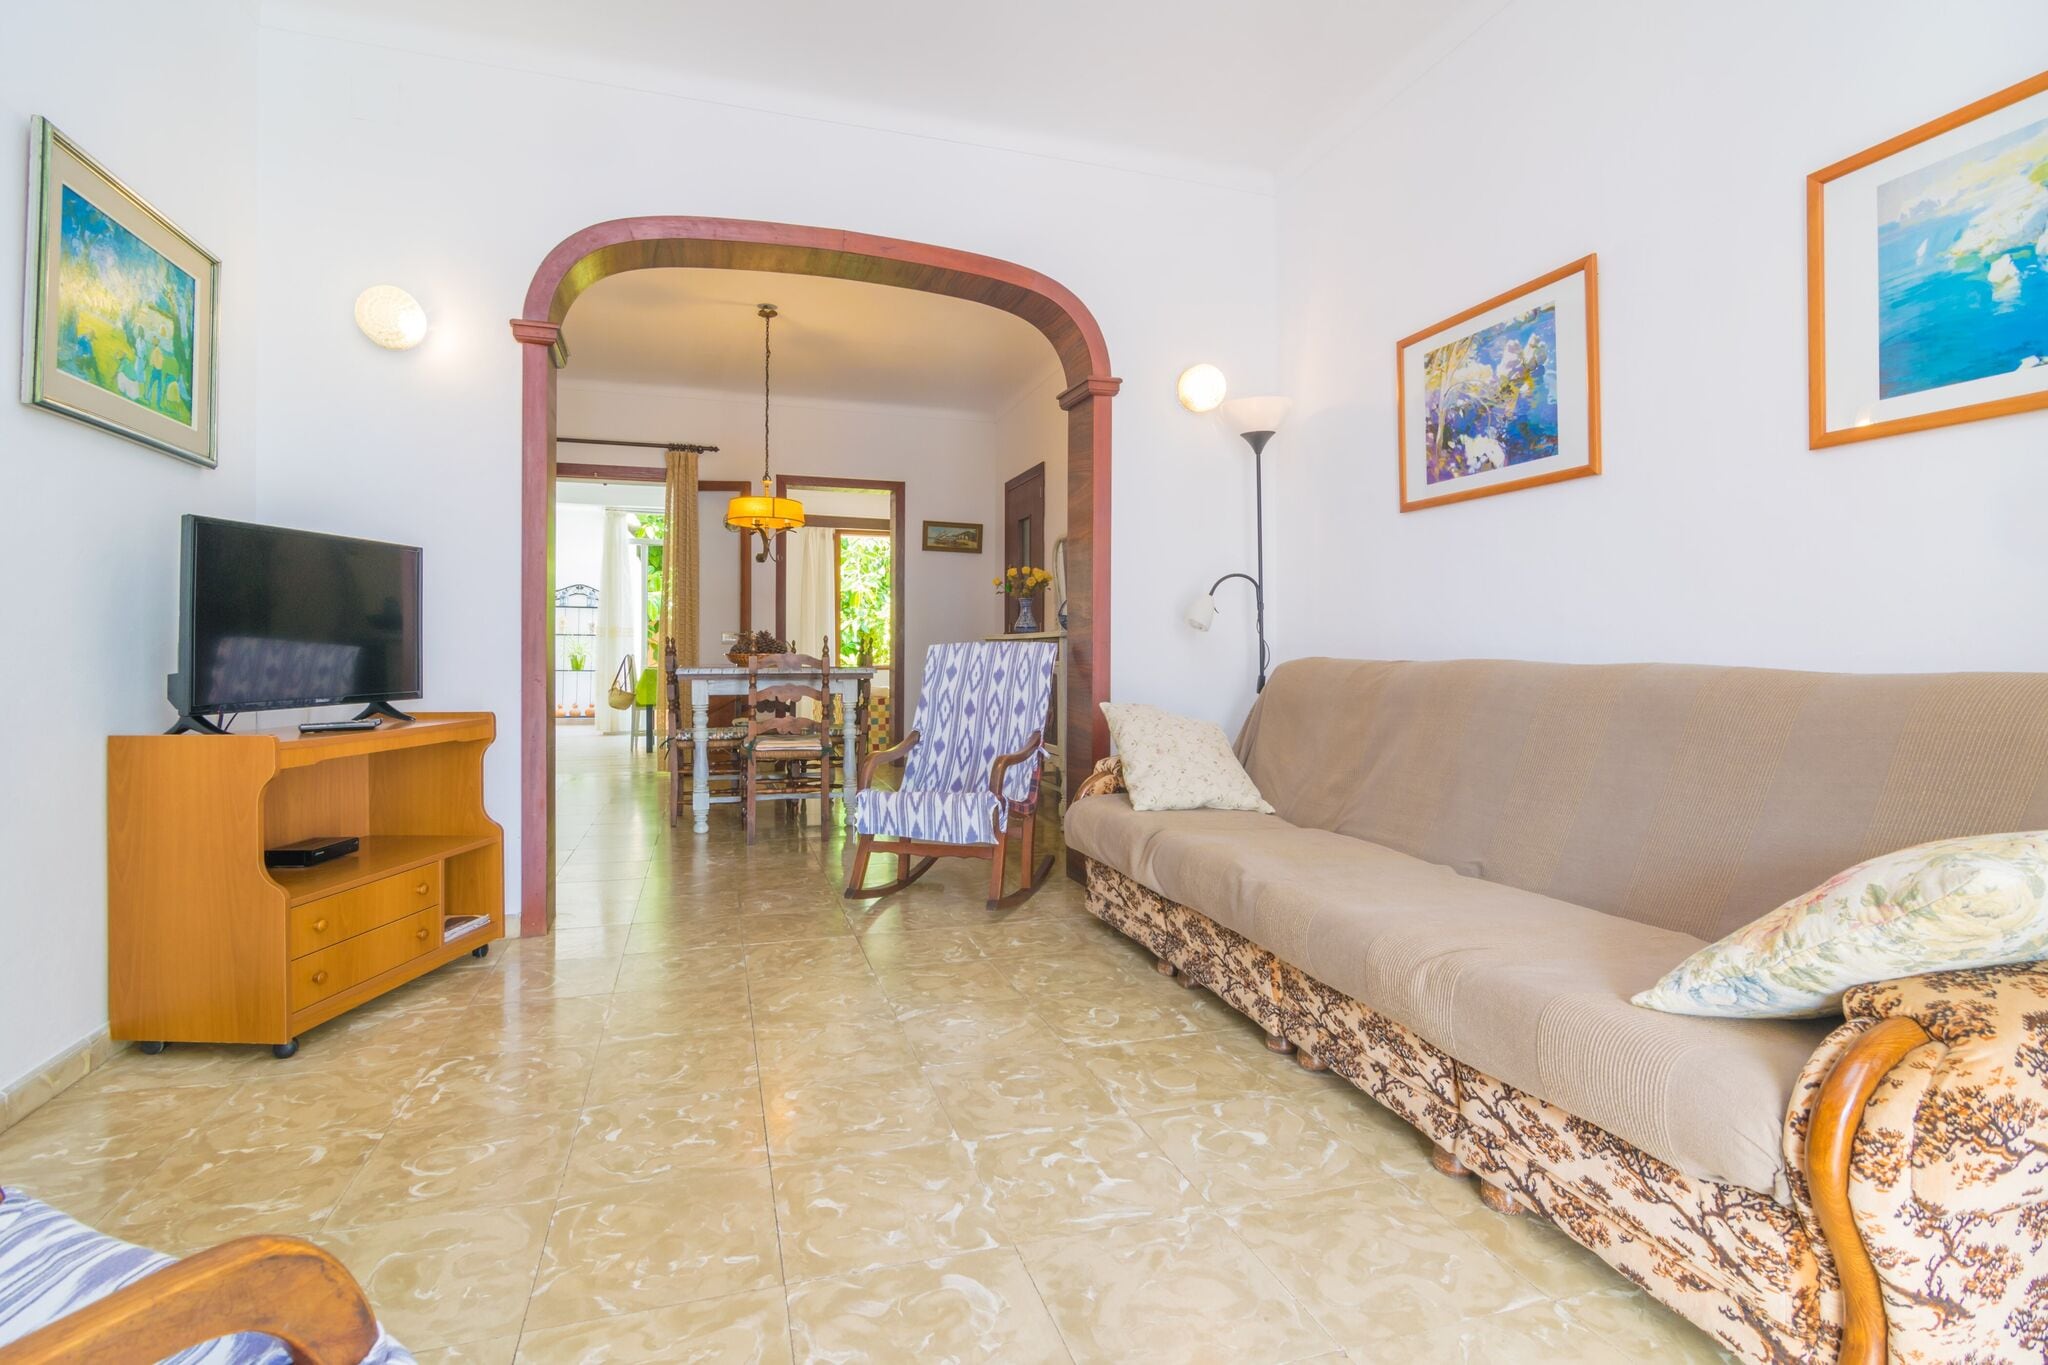 CASA TRADICIONAL CAN PICAFORT - Apartment for 6 people in Ca'n Picafort.